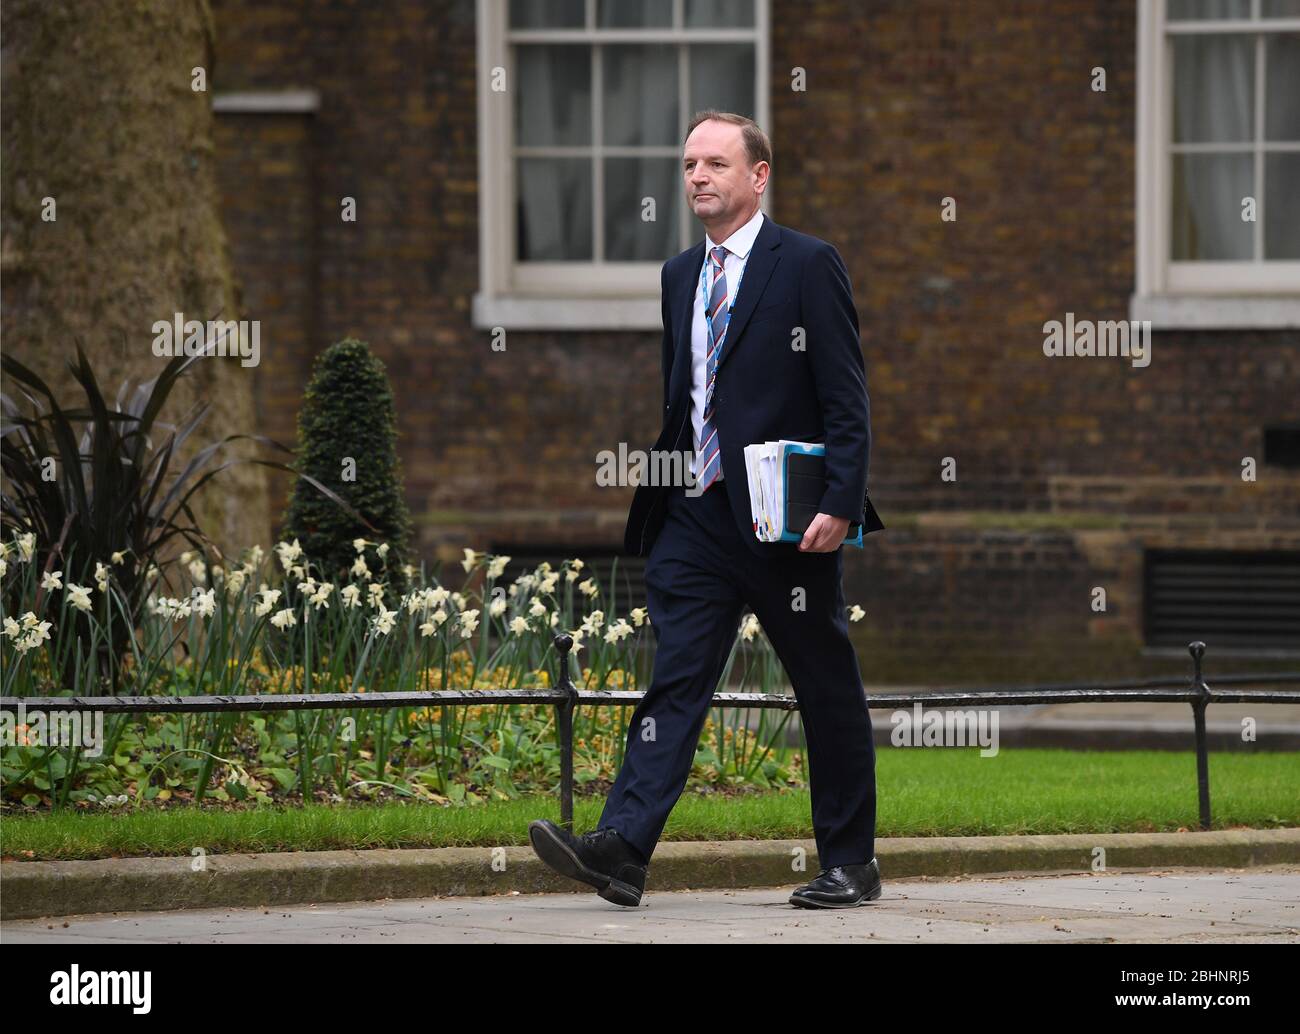 Sir Simon Stevens, Chief Executive des National Health Service in England kommt in Downing Street, London. Stockfoto